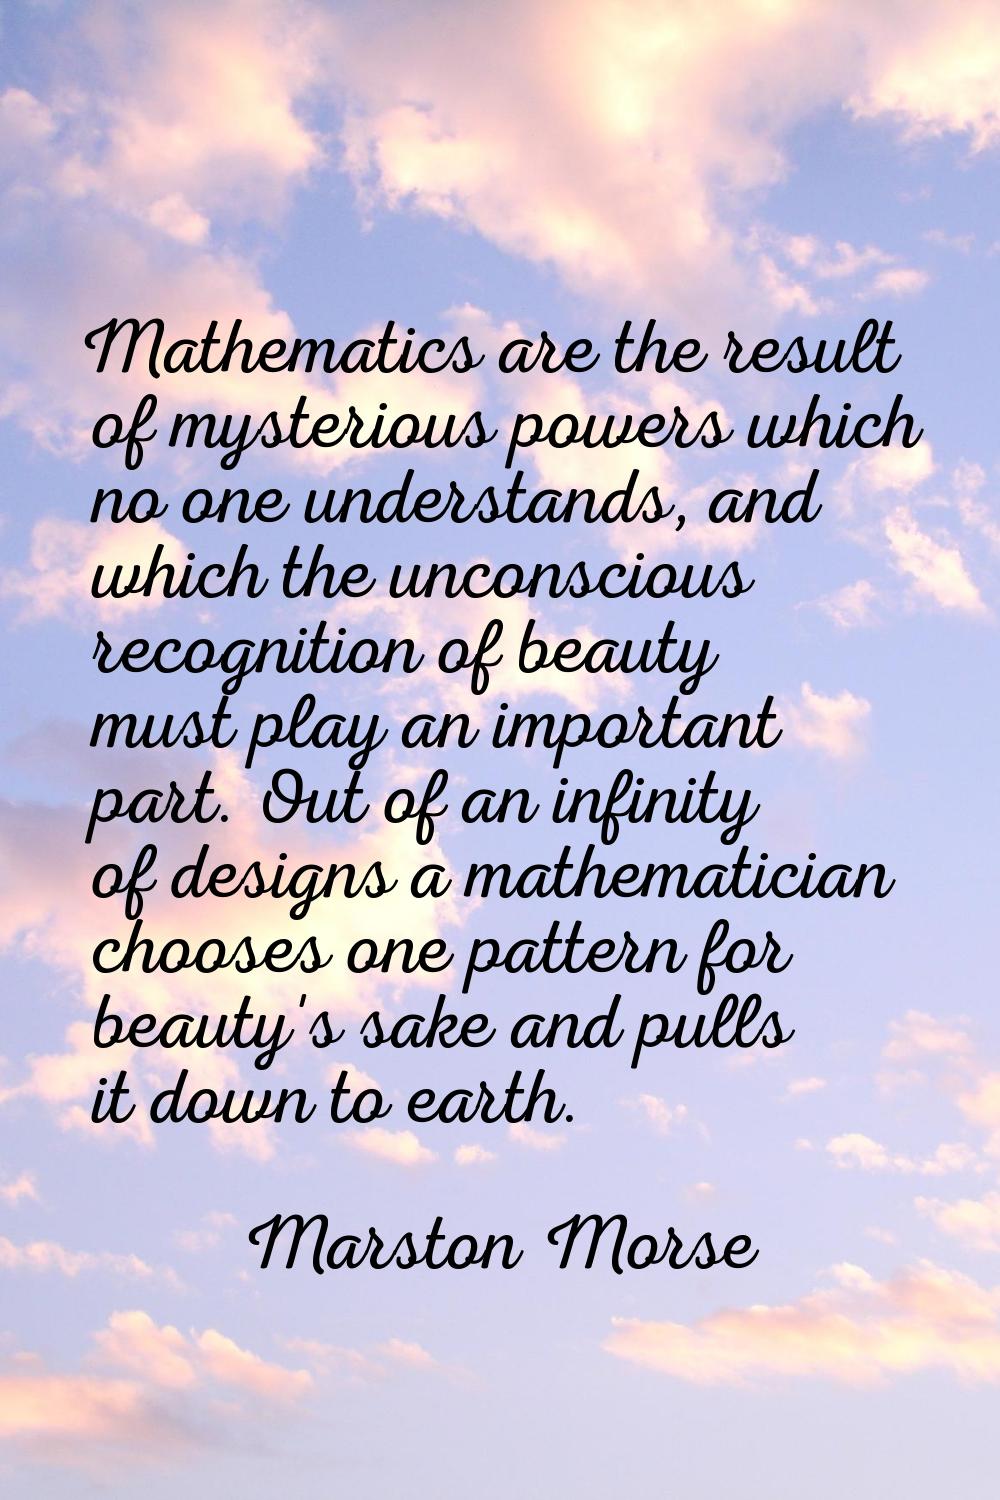 Mathematics are the result of mysterious powers which no one understands, and which the unconscious